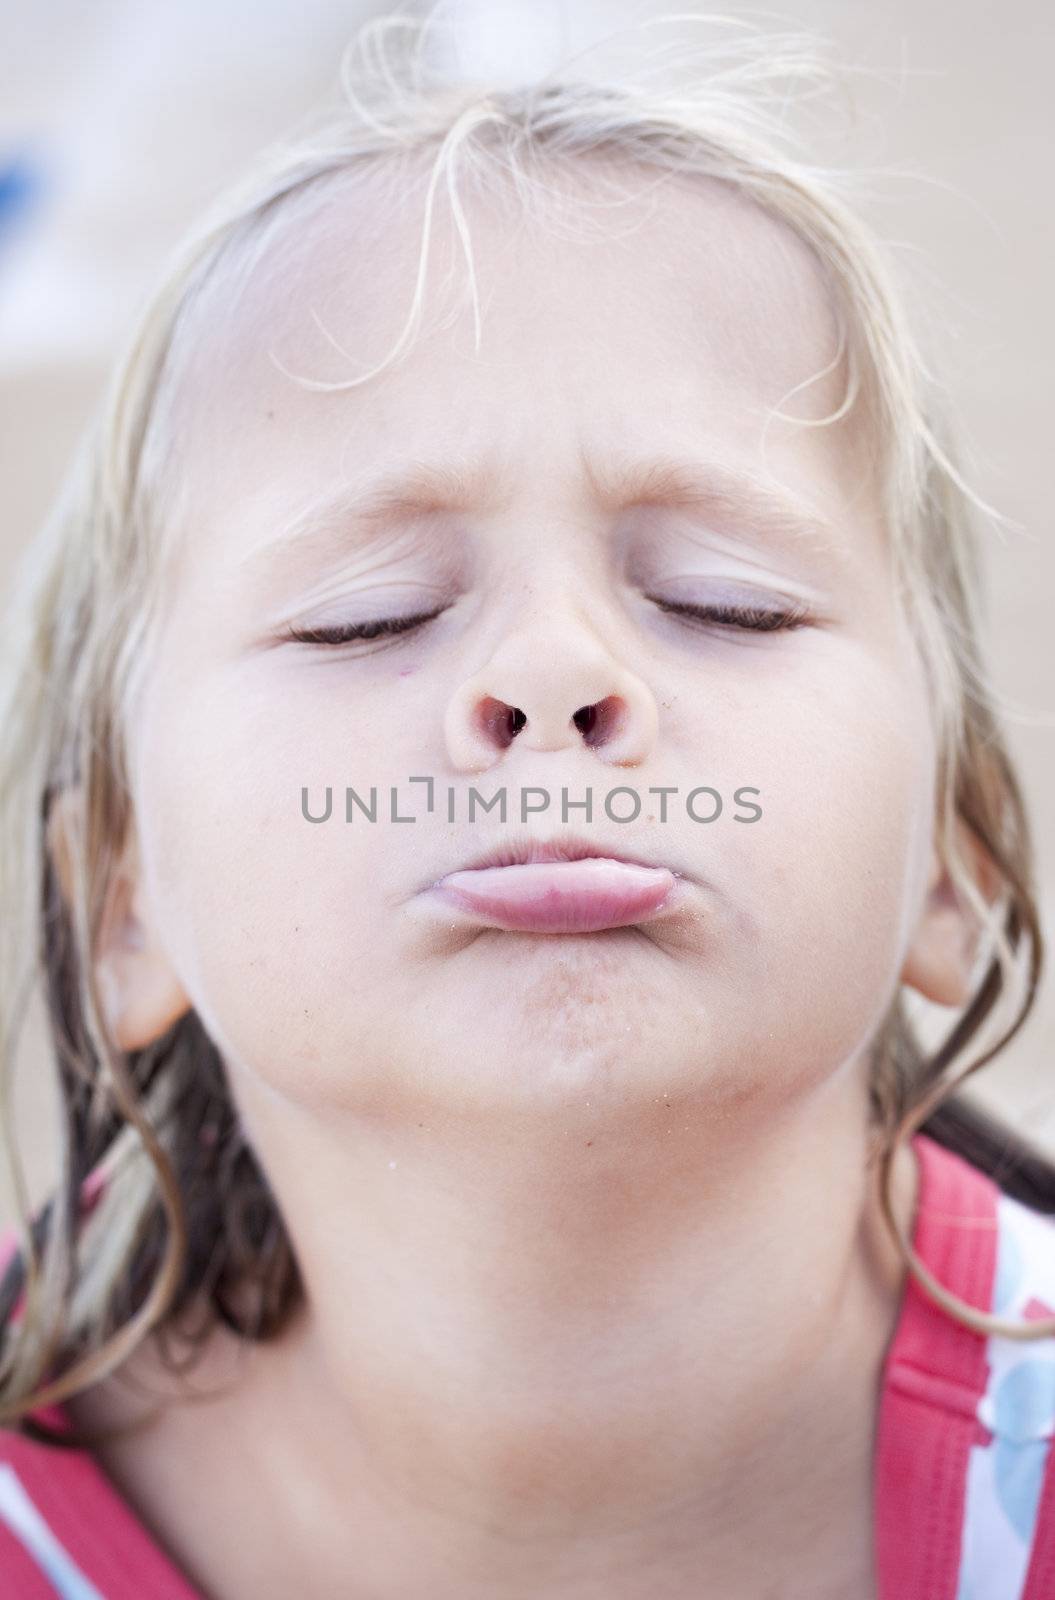 A girl pouting, making a funny face